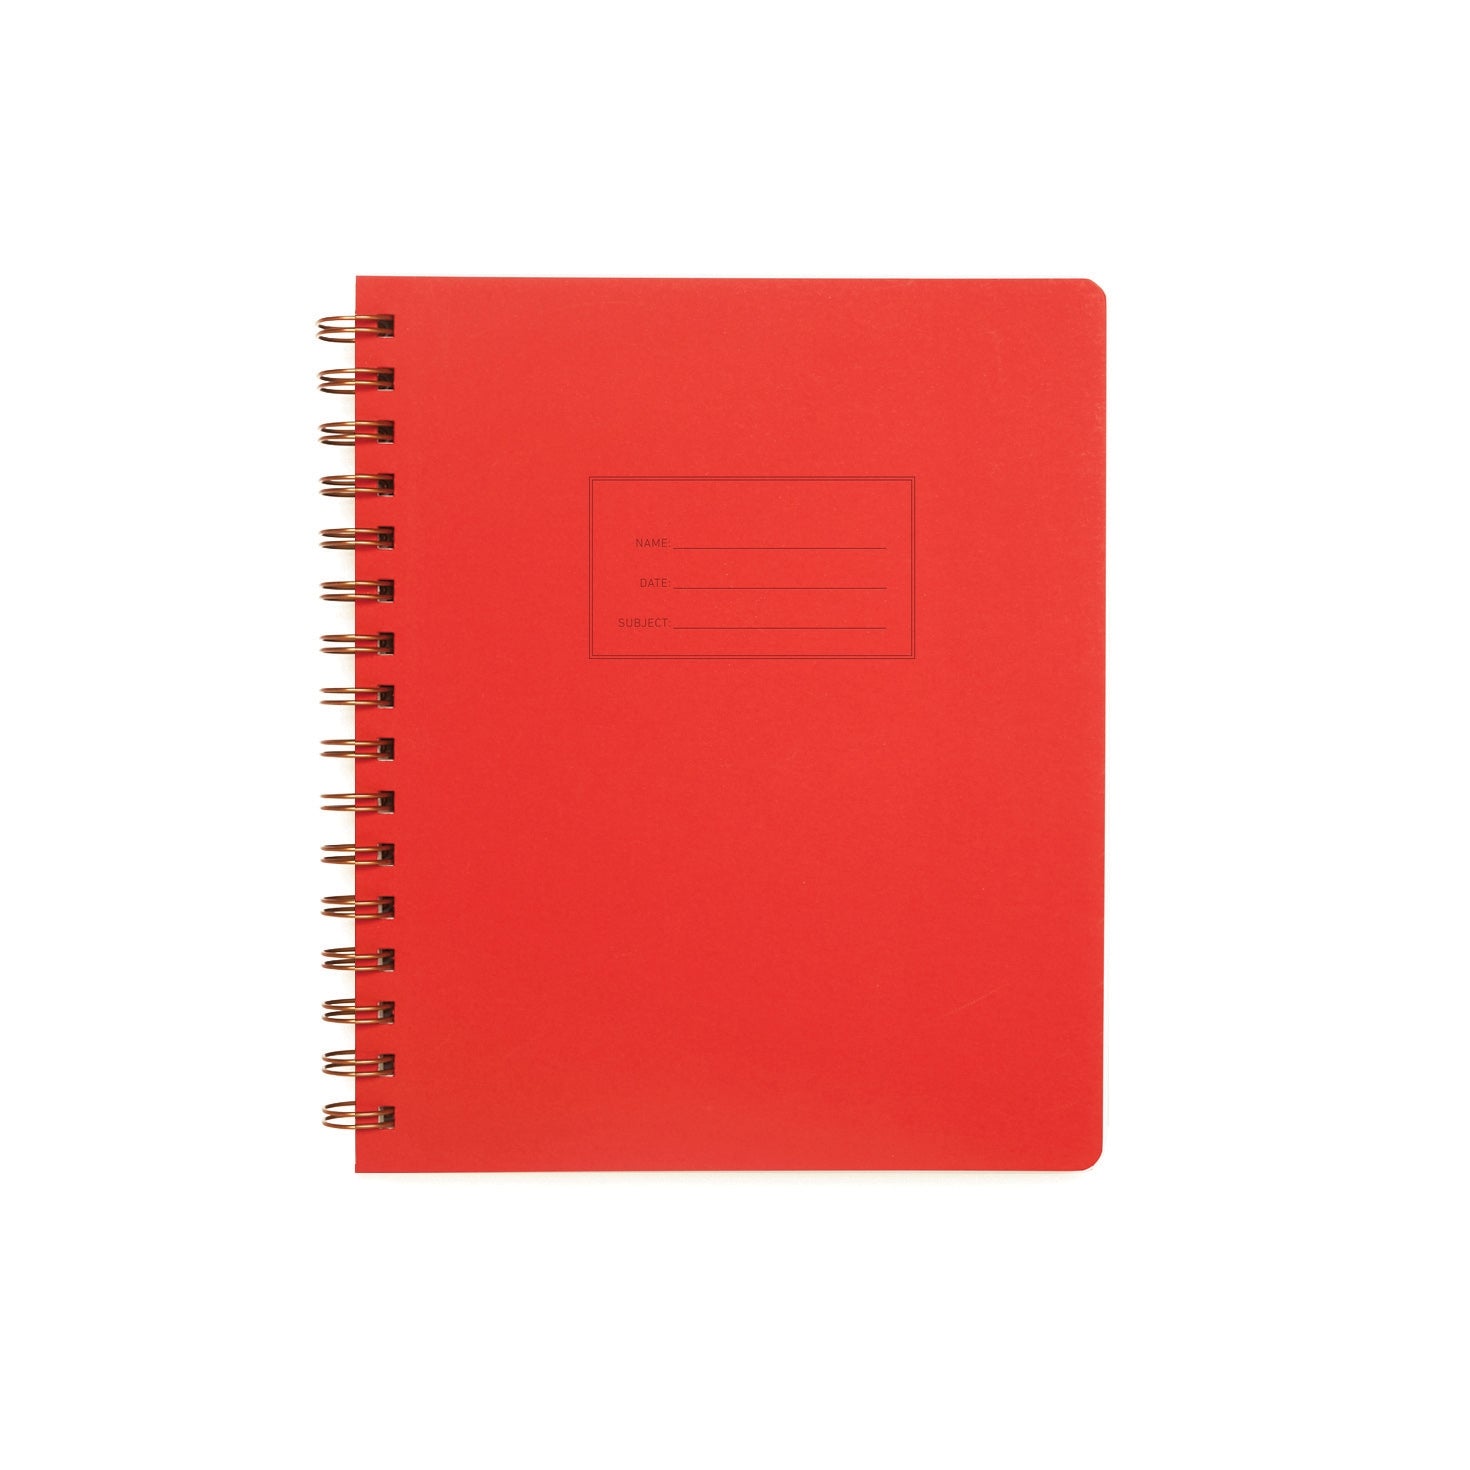 Image red cover with letter pressed text says, “Name” and “Date” with lines for writing in a rectangle. Coiled binding on left side.